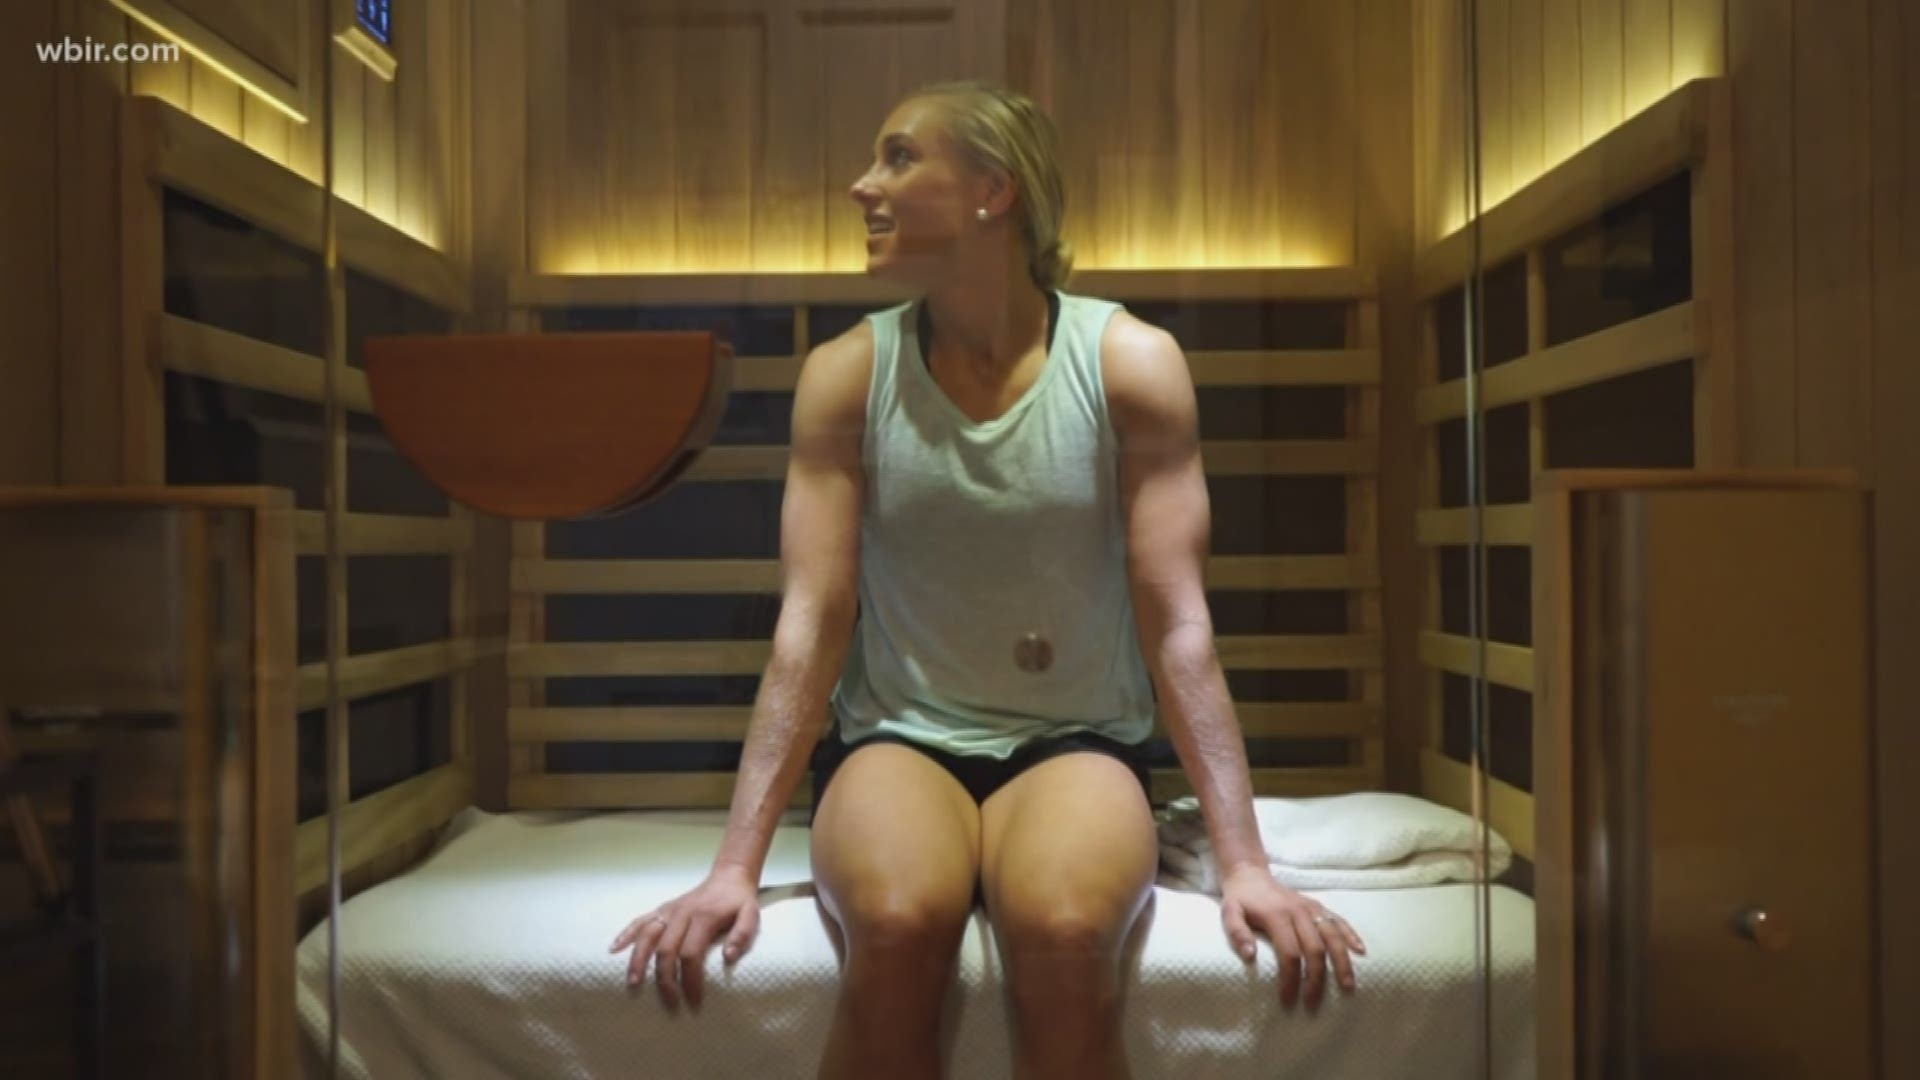 10News reporter Leslie Ackerson shows us how a step inside an infrared sauna for a sweat sesh could be great for your health.